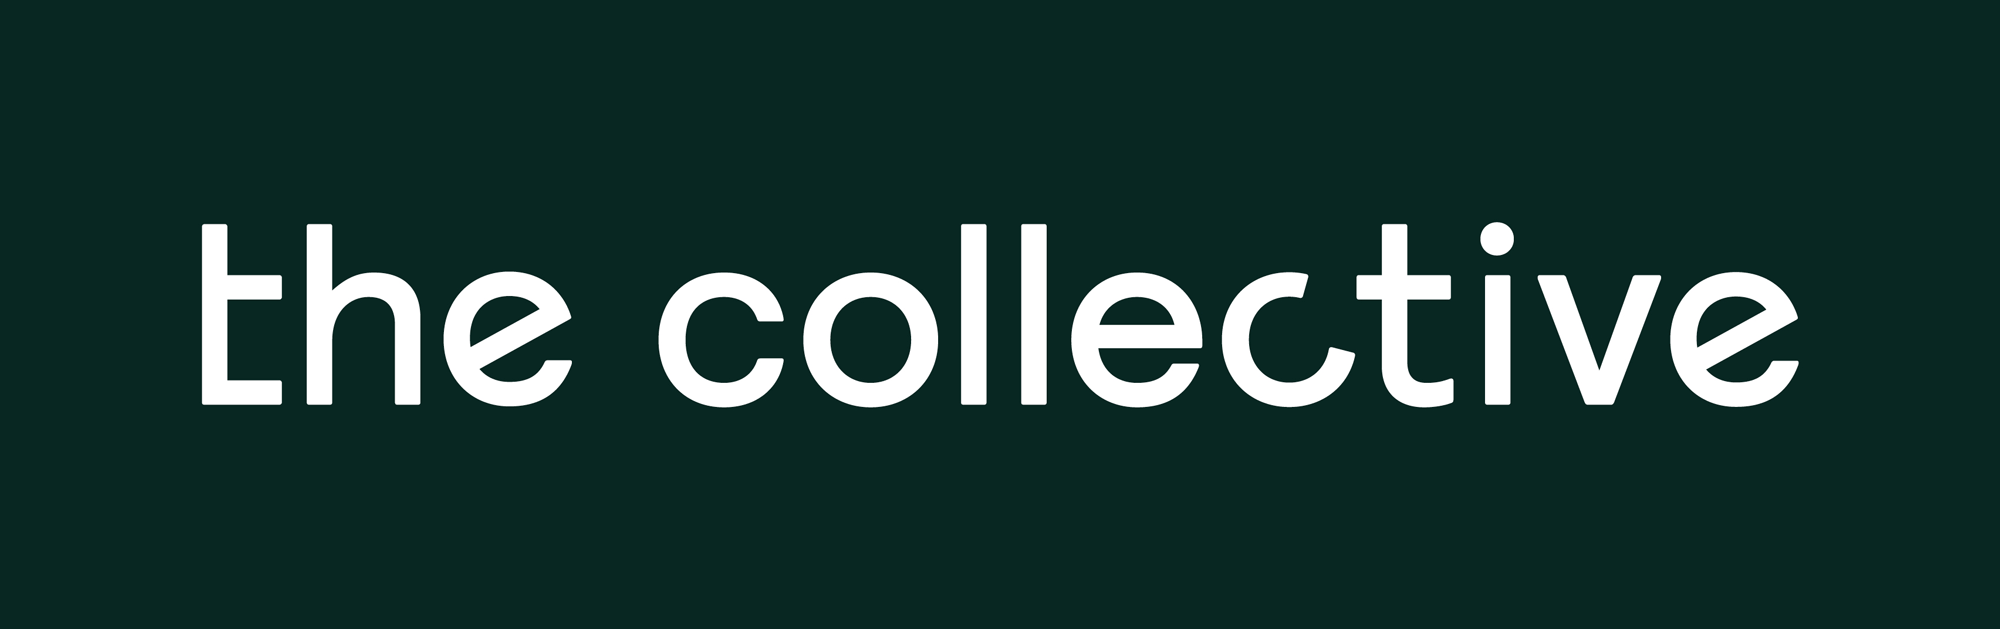 New Logo and Identity for The Collective by DesignStudio